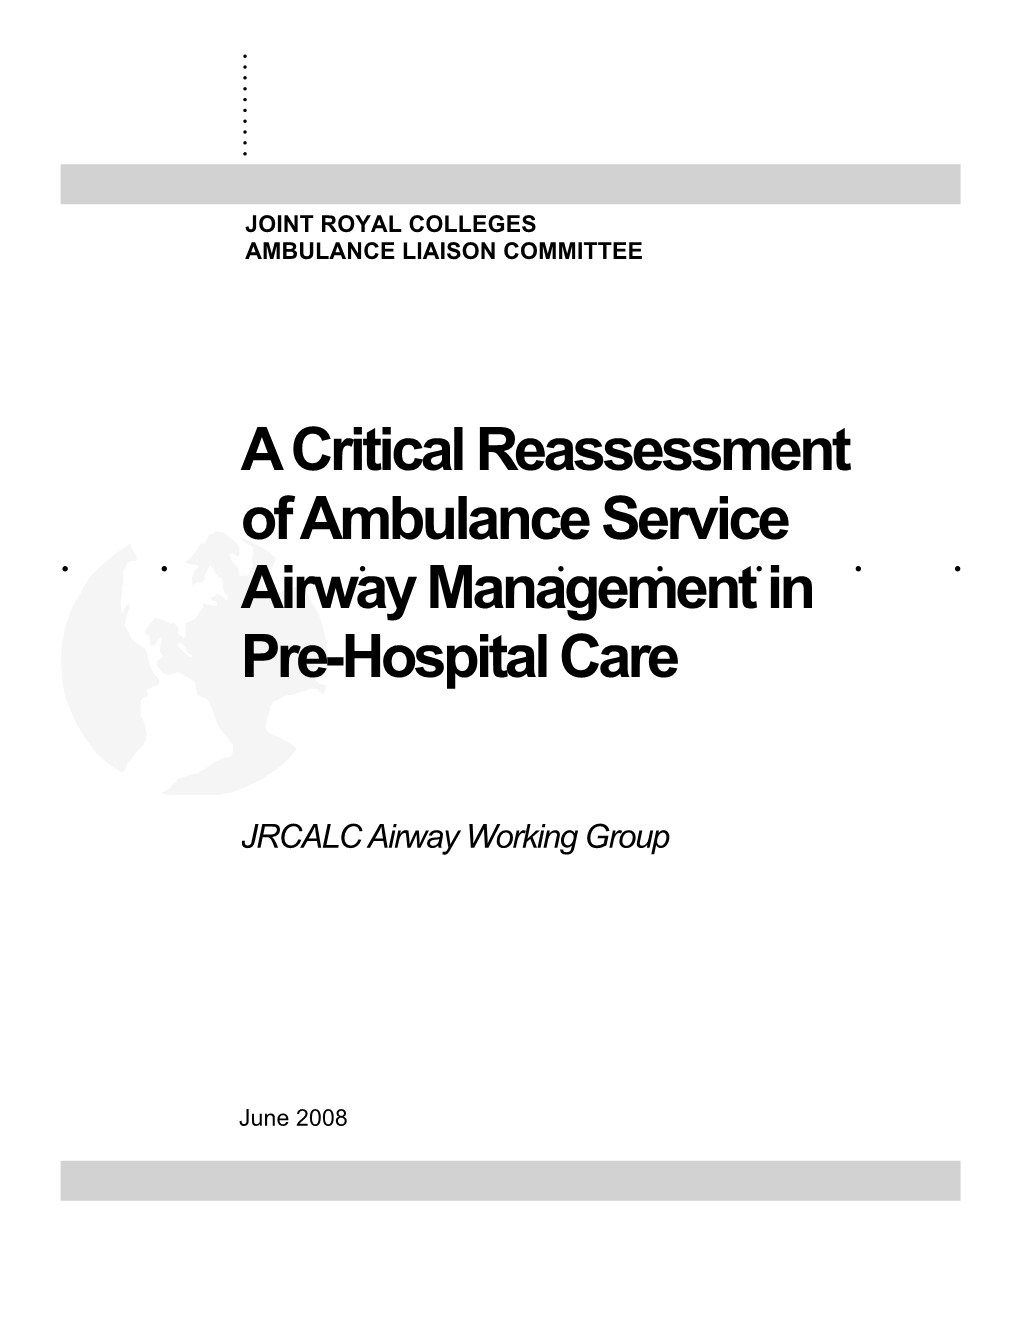 A Critical Reassessment of Ambulance Service Airway Management in Pre-Hospital Care